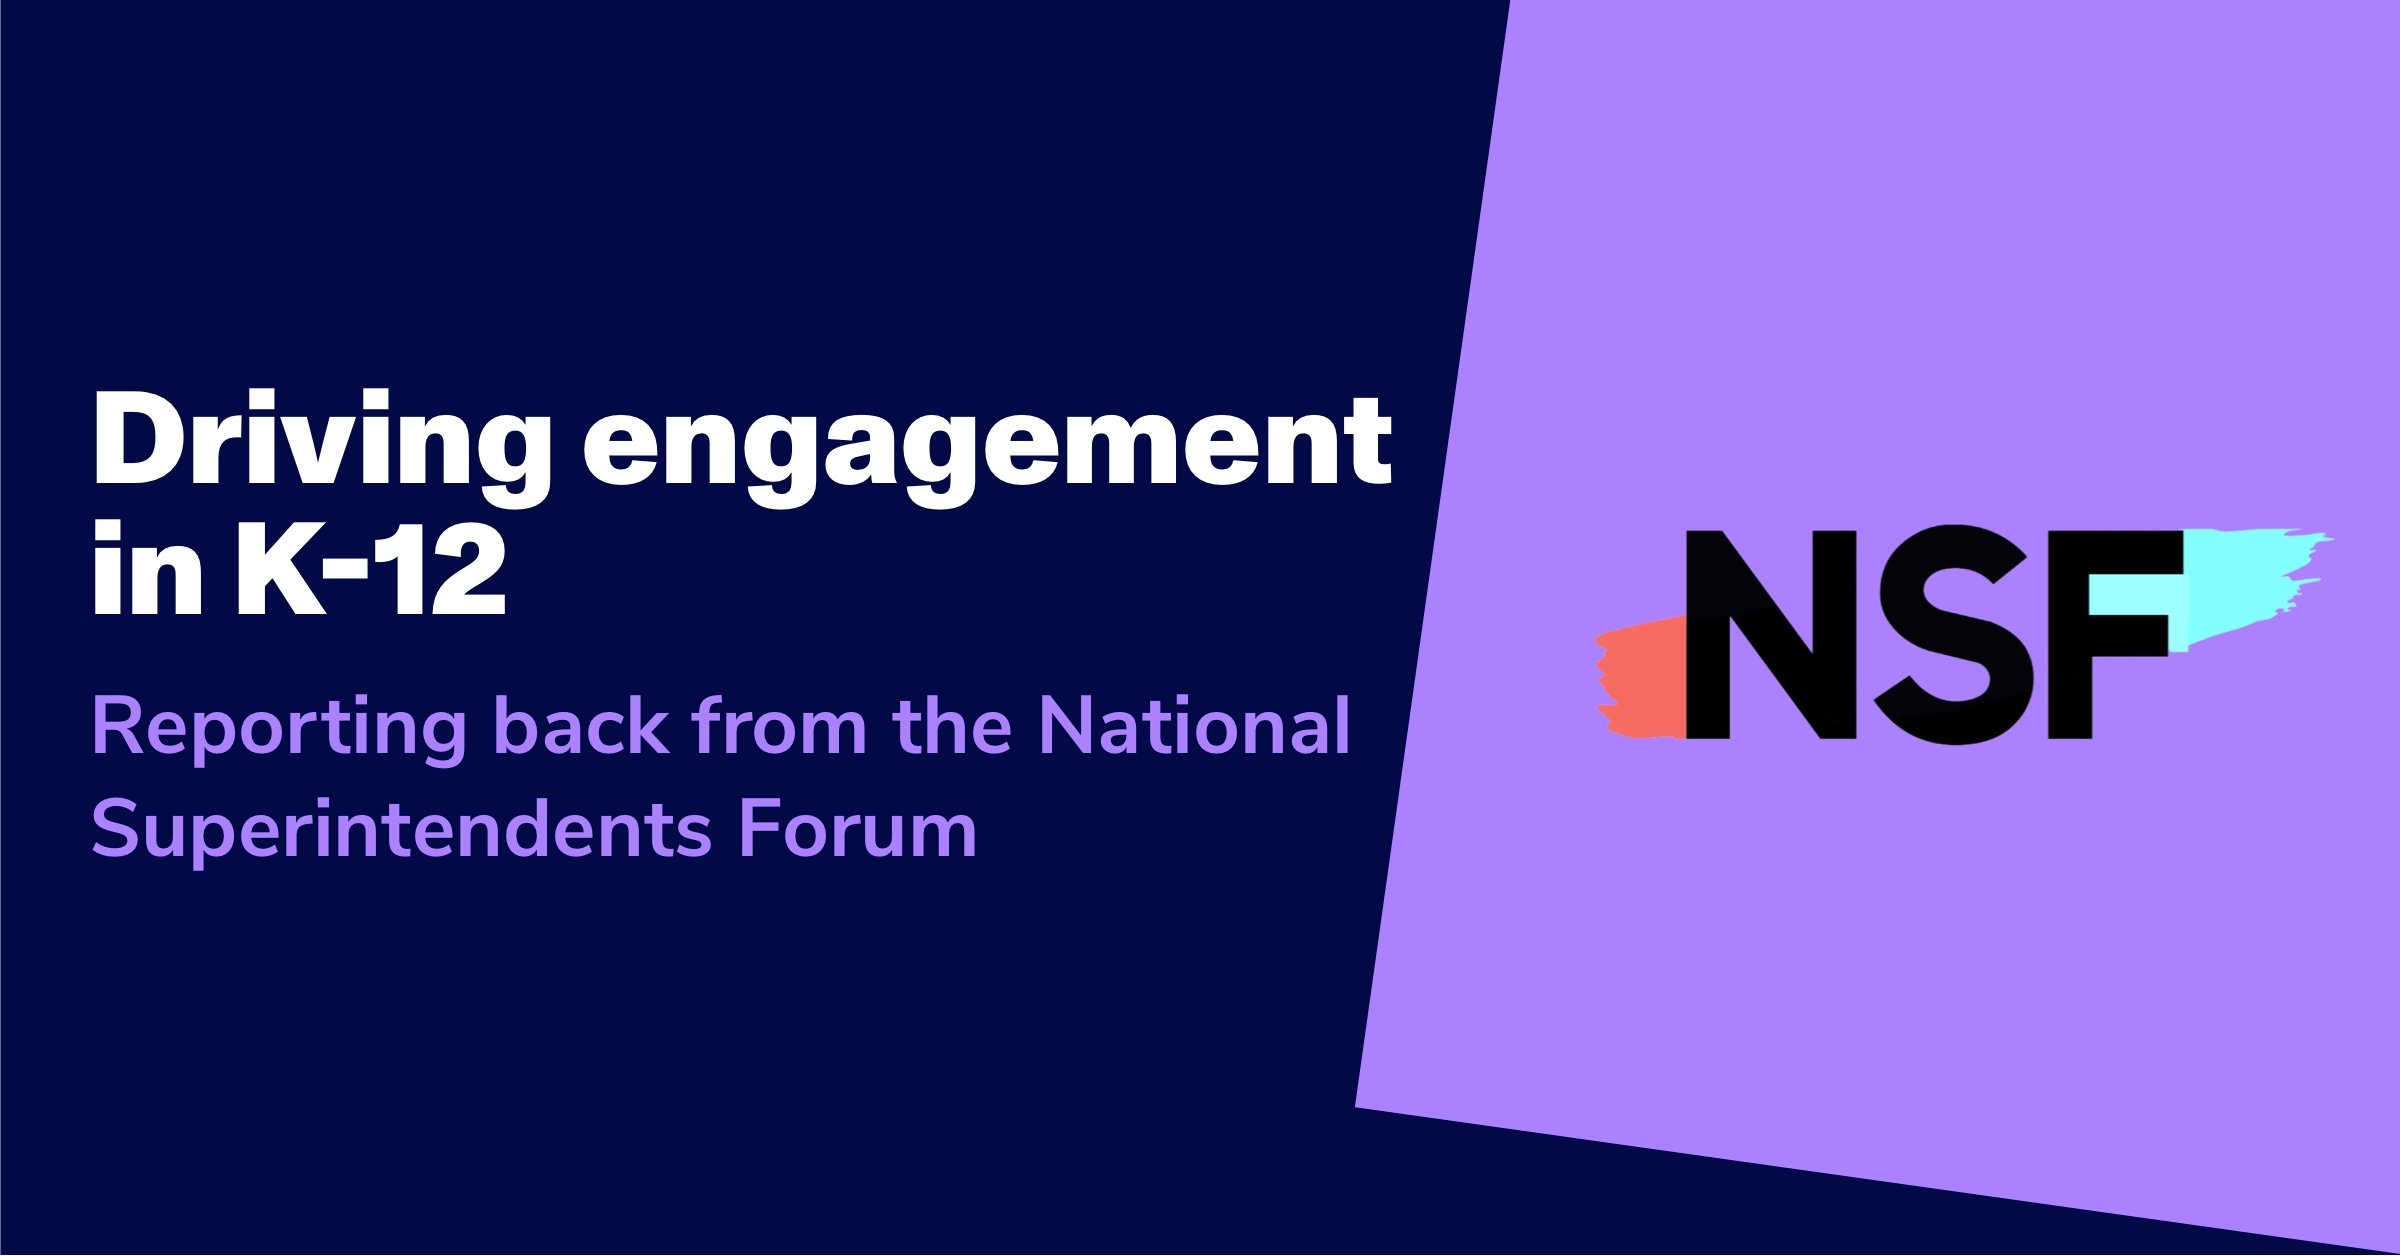 Driving engagement in K-12: Reporting back from the National Superintendents Forum